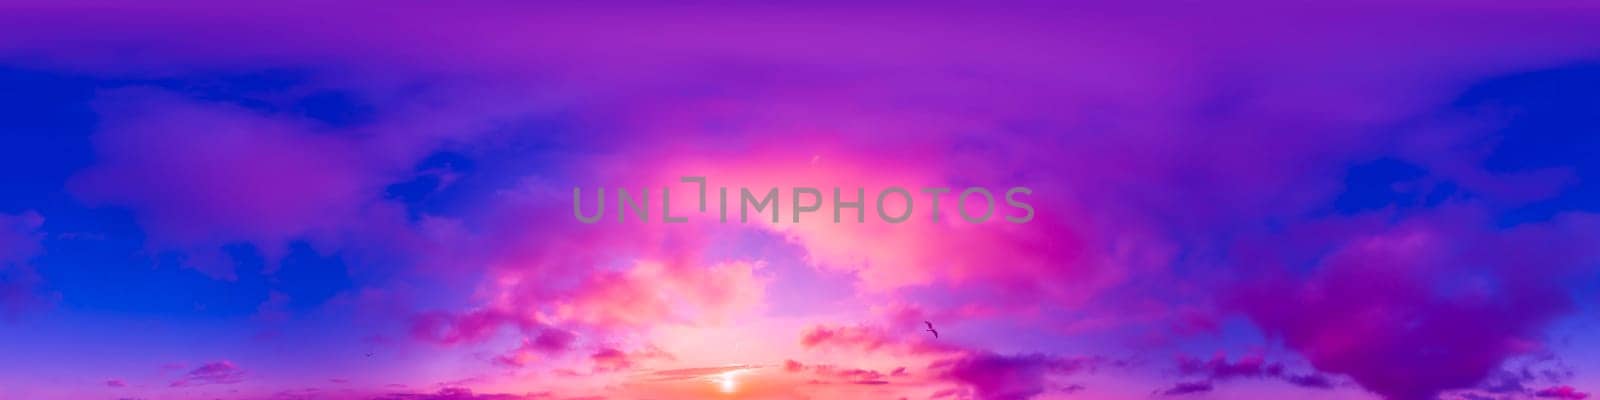 Blue sky panorama with magenta Cirrus clouds in Seamless spherical equirectangular format. Climate and weather change